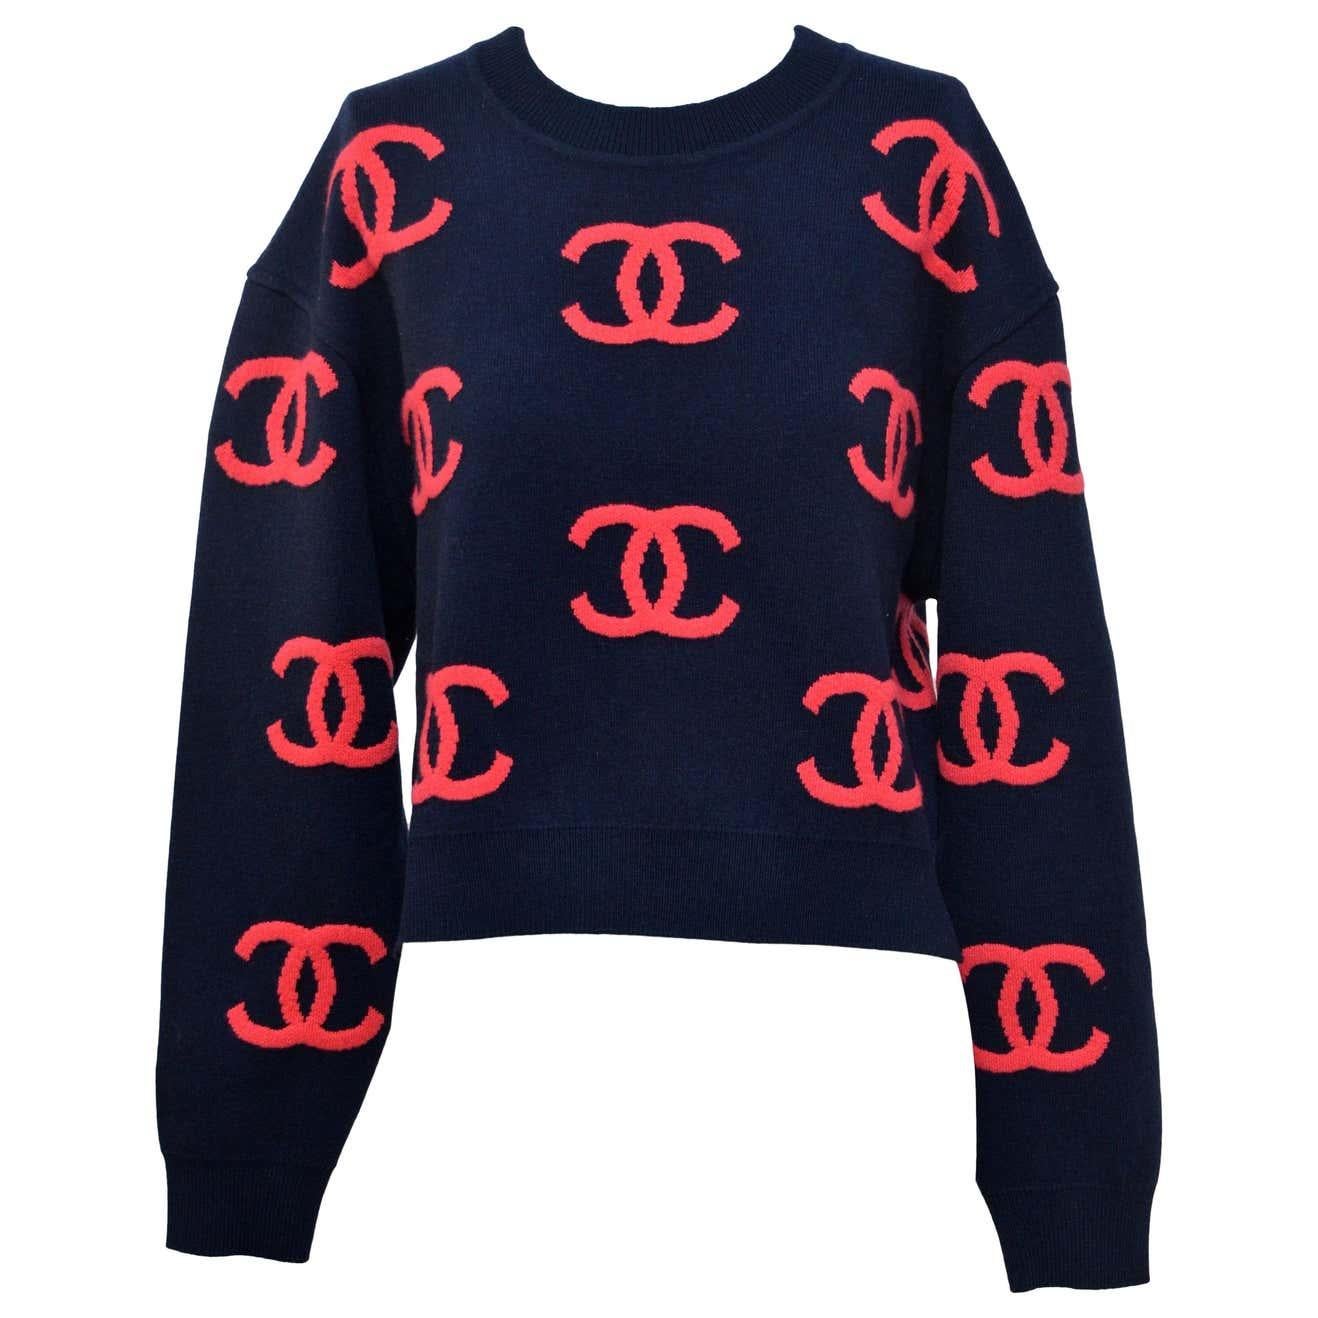 100% authentic guaranteed Chanel sweater . Original receipt from Chanel available to purchaser upon request. New with tags and Chanel pouch Size 38 Main base color in person is dark blue.Style is cropped . Please familiarize yourself with Chanel fit